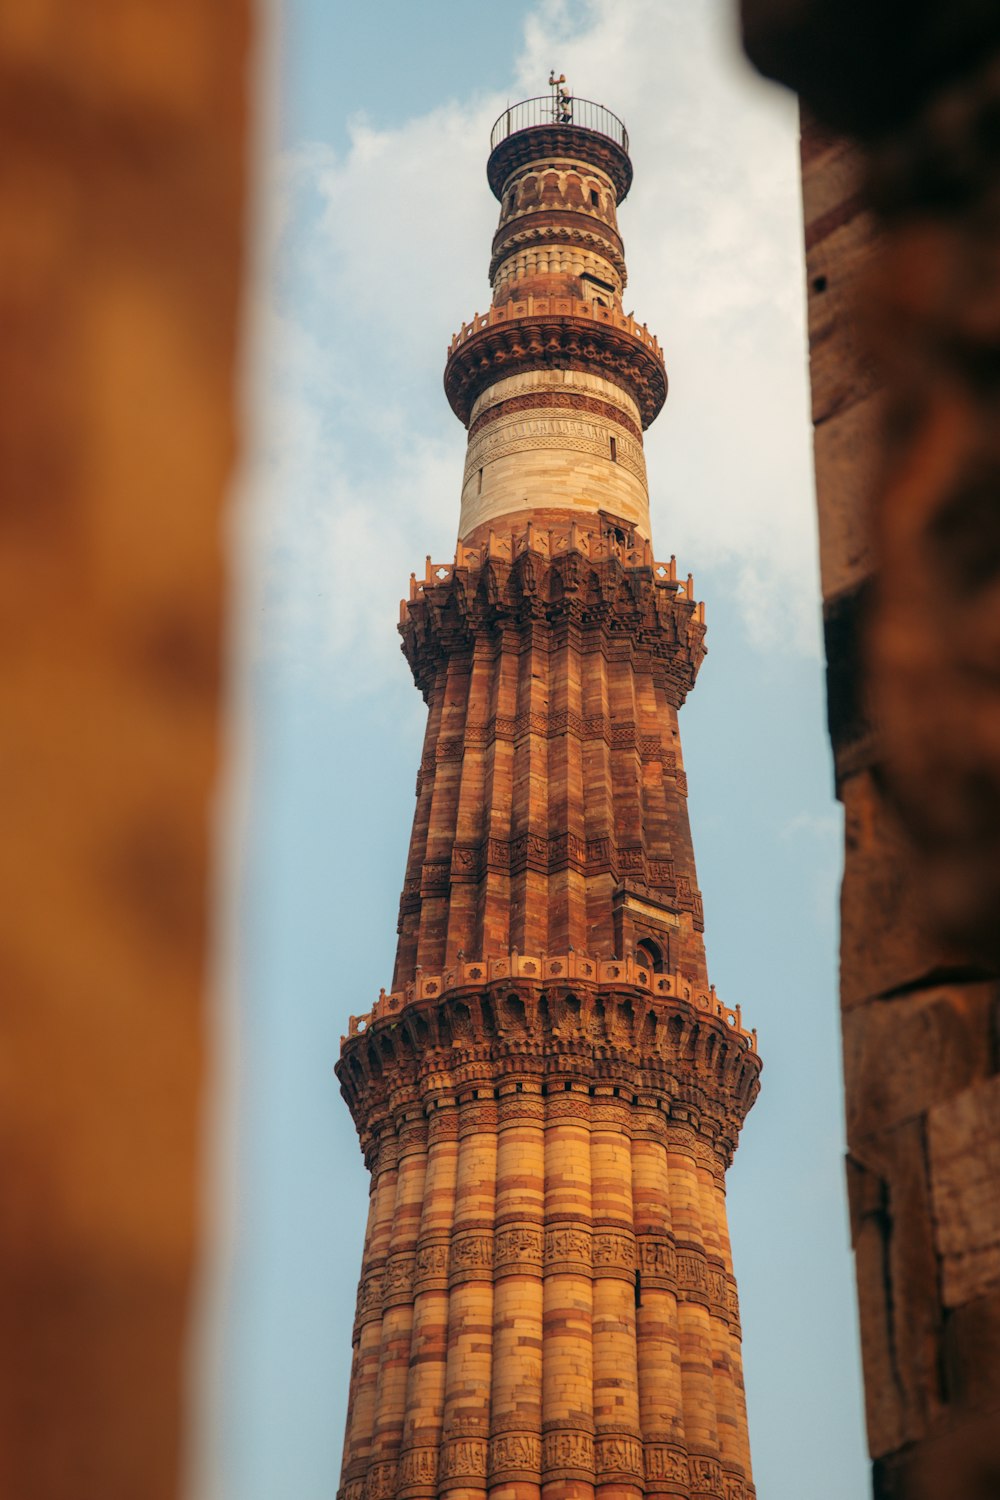 a tall tower with a pointed top with Qutub Minar in the background